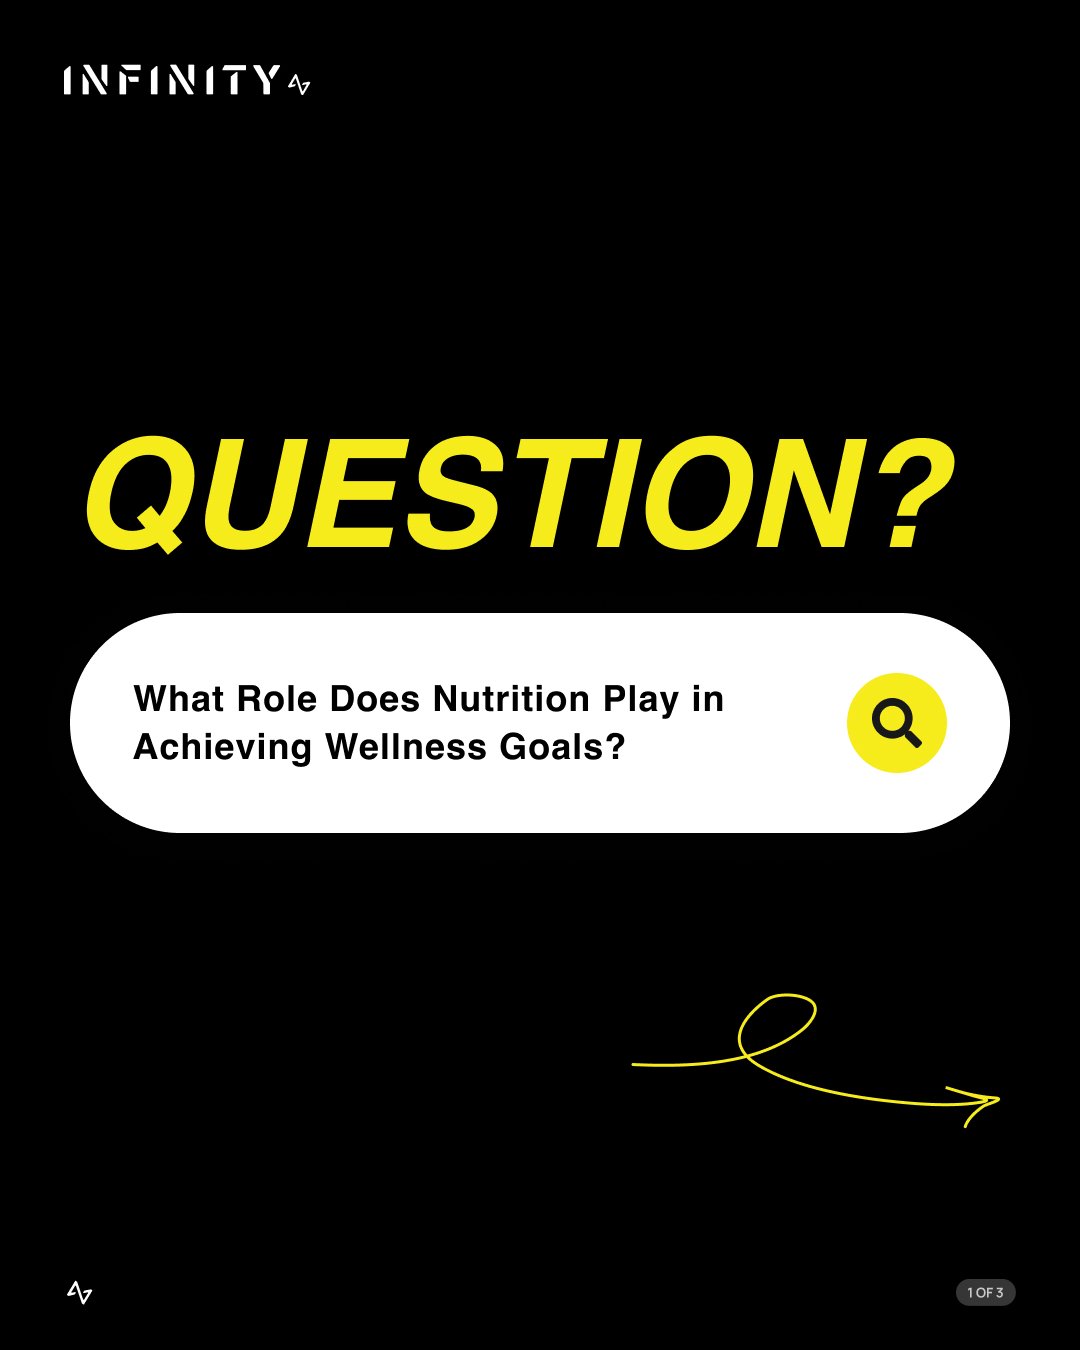 Nutrition plays a crucial role in fueling your body for peak performance. Focus on a balanced diet filled with fruits, veggies, lean proteins, and whole grains. Minimize processed foods, sugary snacks, and excess alcohol for maximum results.

Ready t